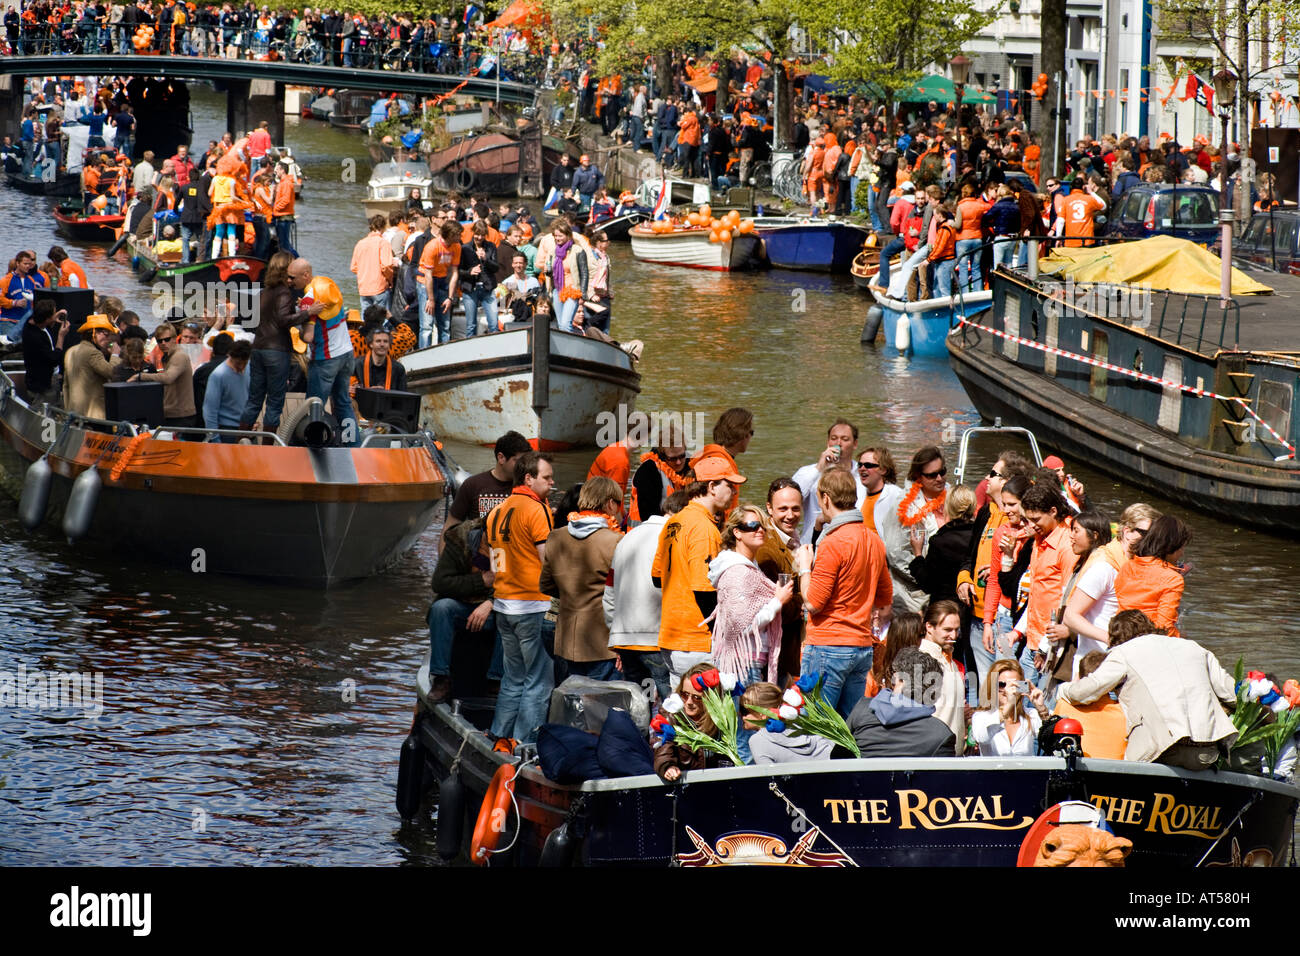 Orange is the dominating color on the canals of Amsterdam on the celebration of the Queen's Birthday. Stock Photo